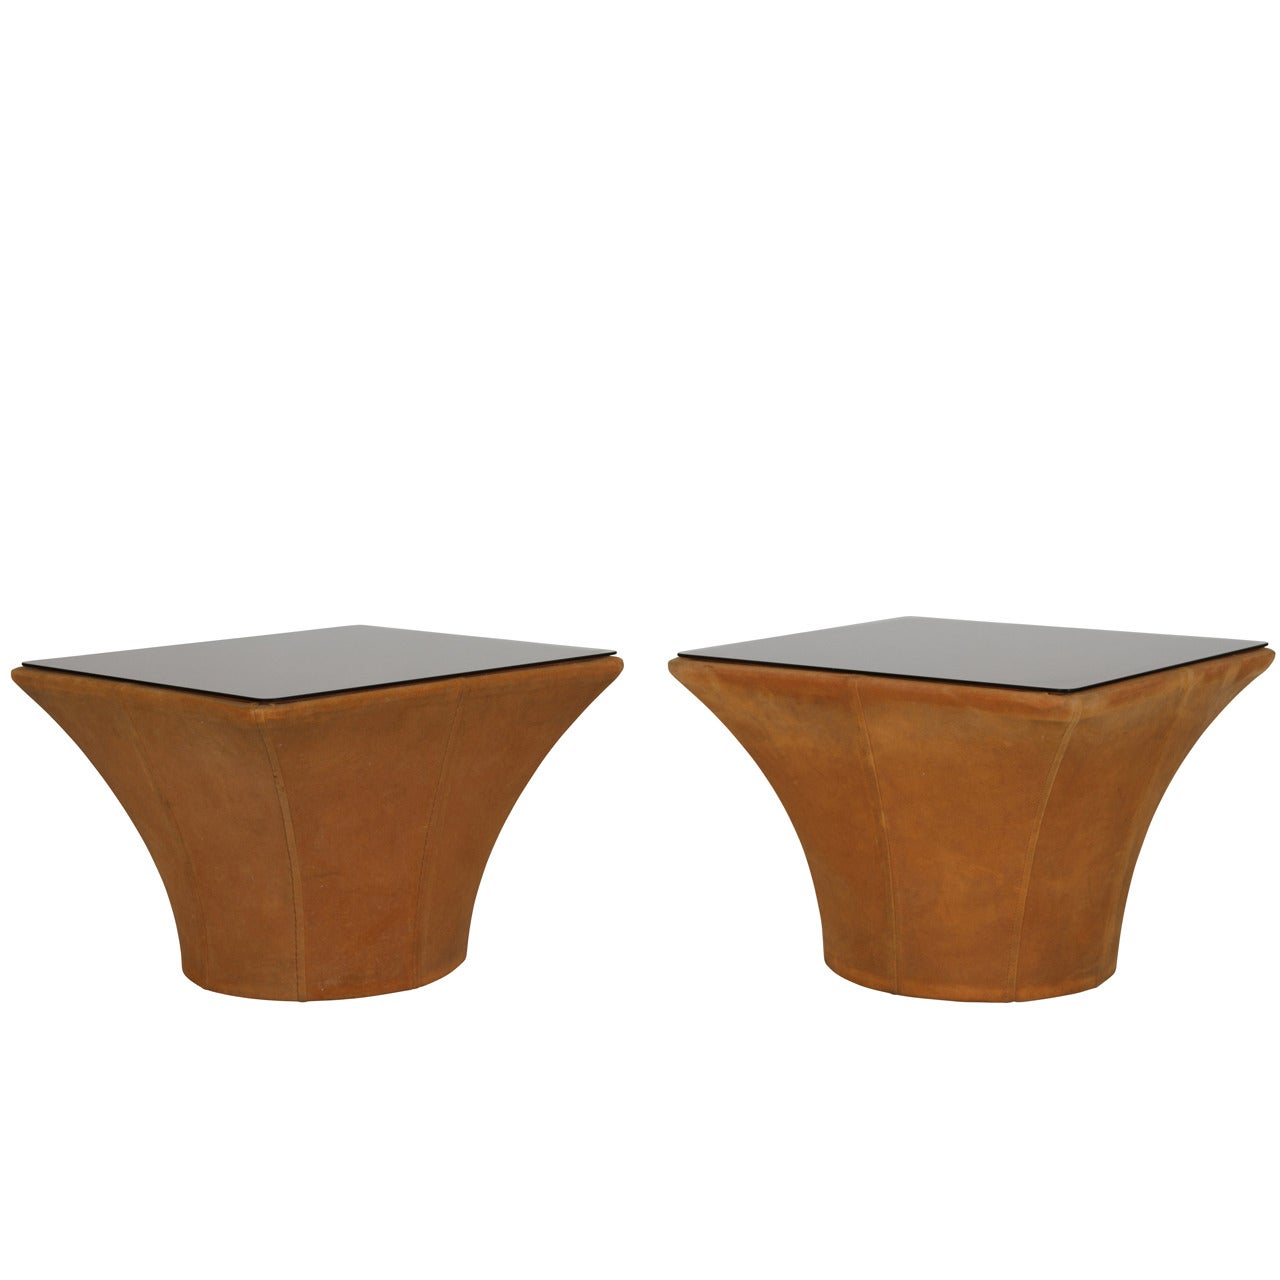 Pair of French Bronze Colored Suede Cloth Side Tables with Bronze Glass Tops